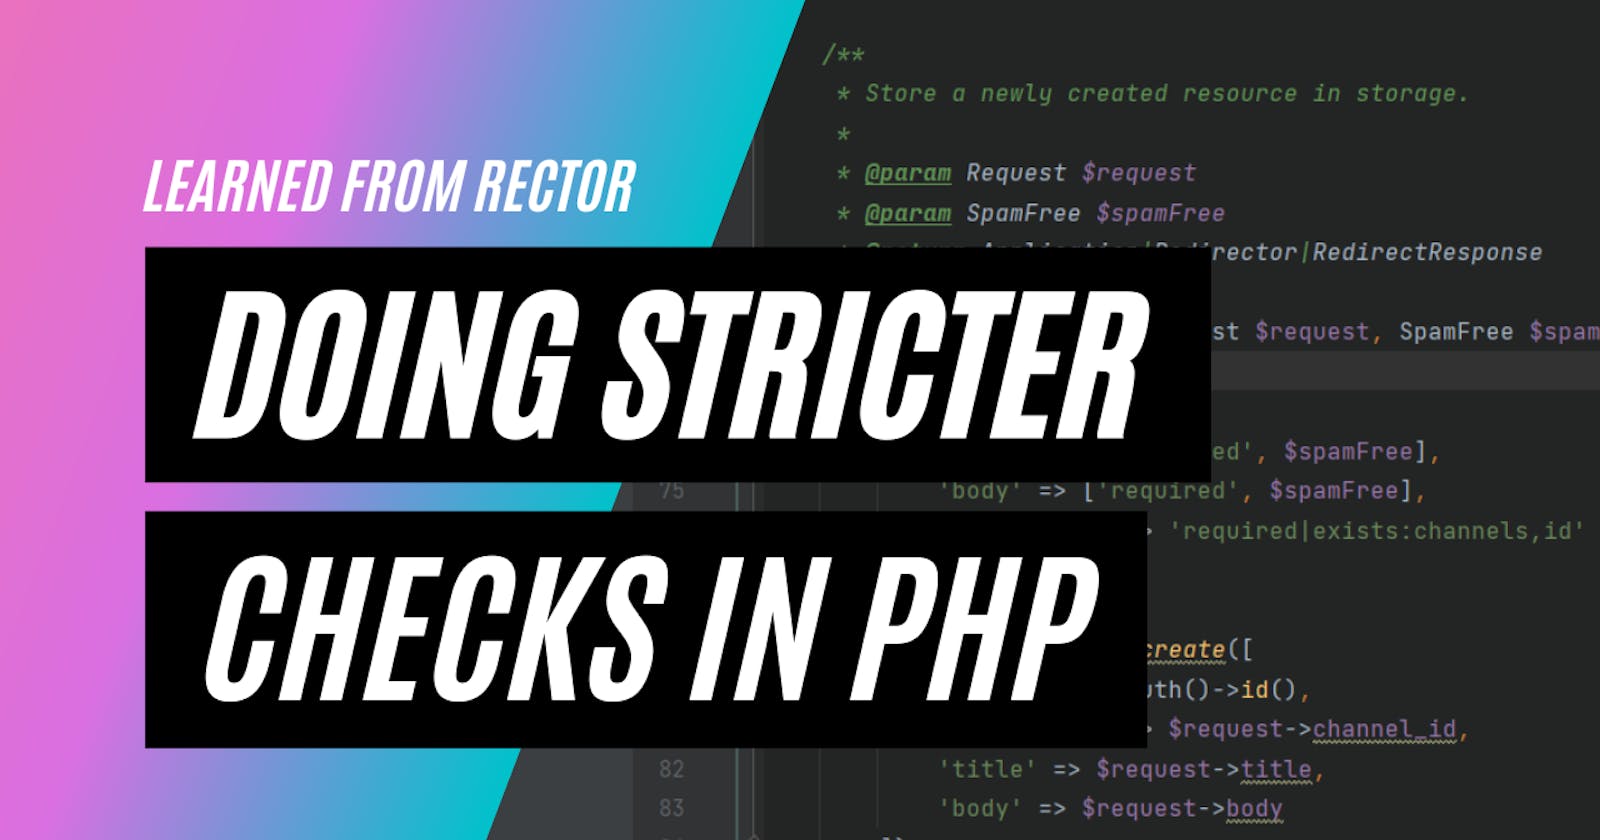 Doing stricter checks in PHP